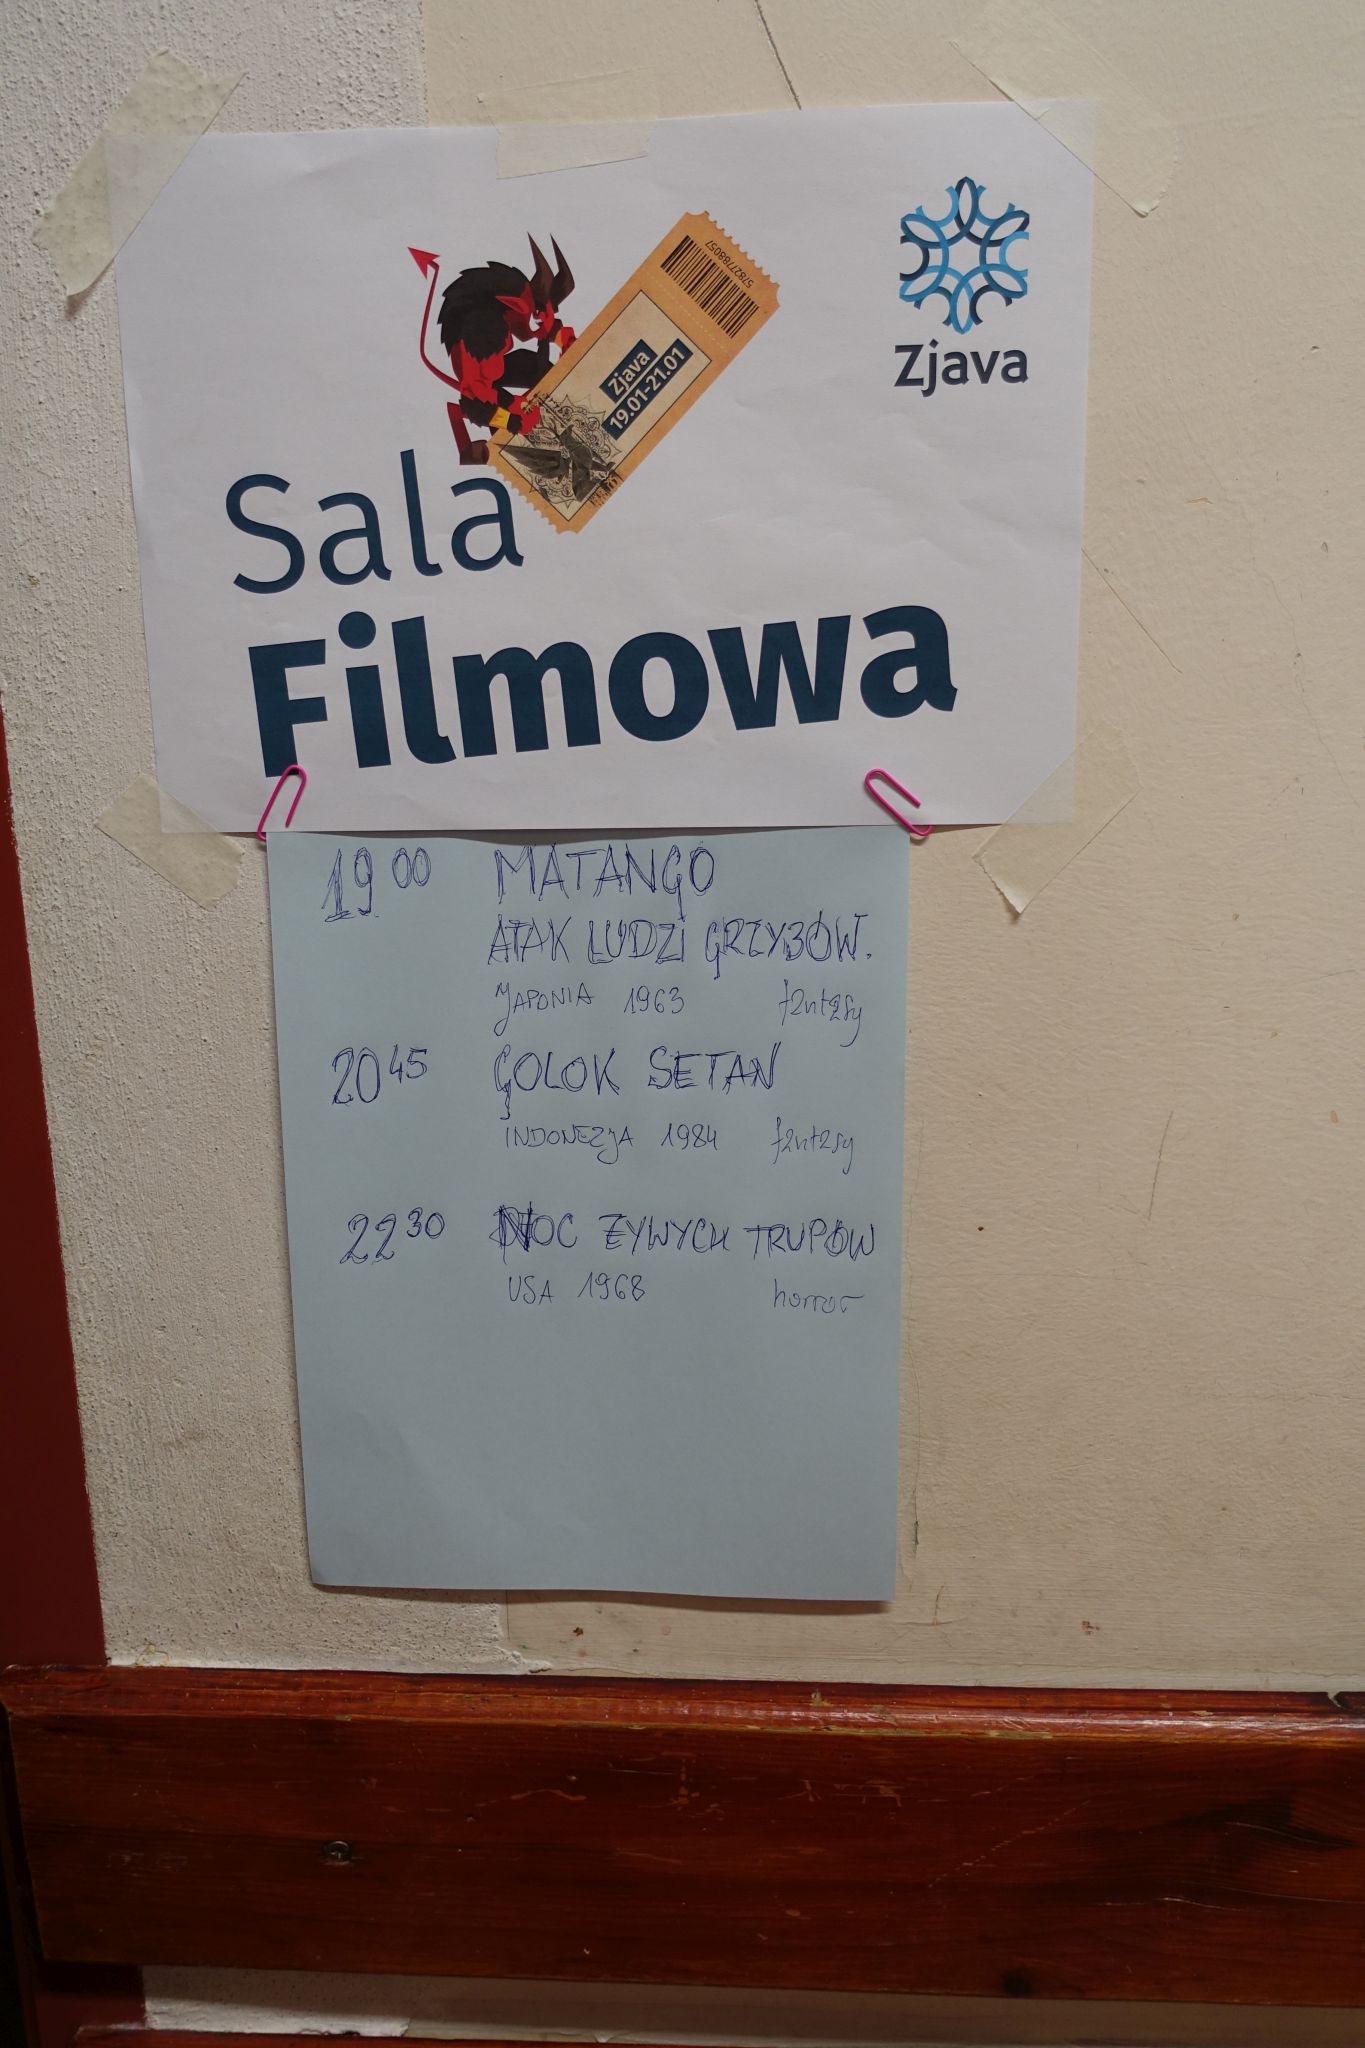 Two sheets of paper glued to a wall. the first is nicely printed and reads 'Zjava Sala Filmowa'. The second one below is written with a pen and lists three movies that will be screened.